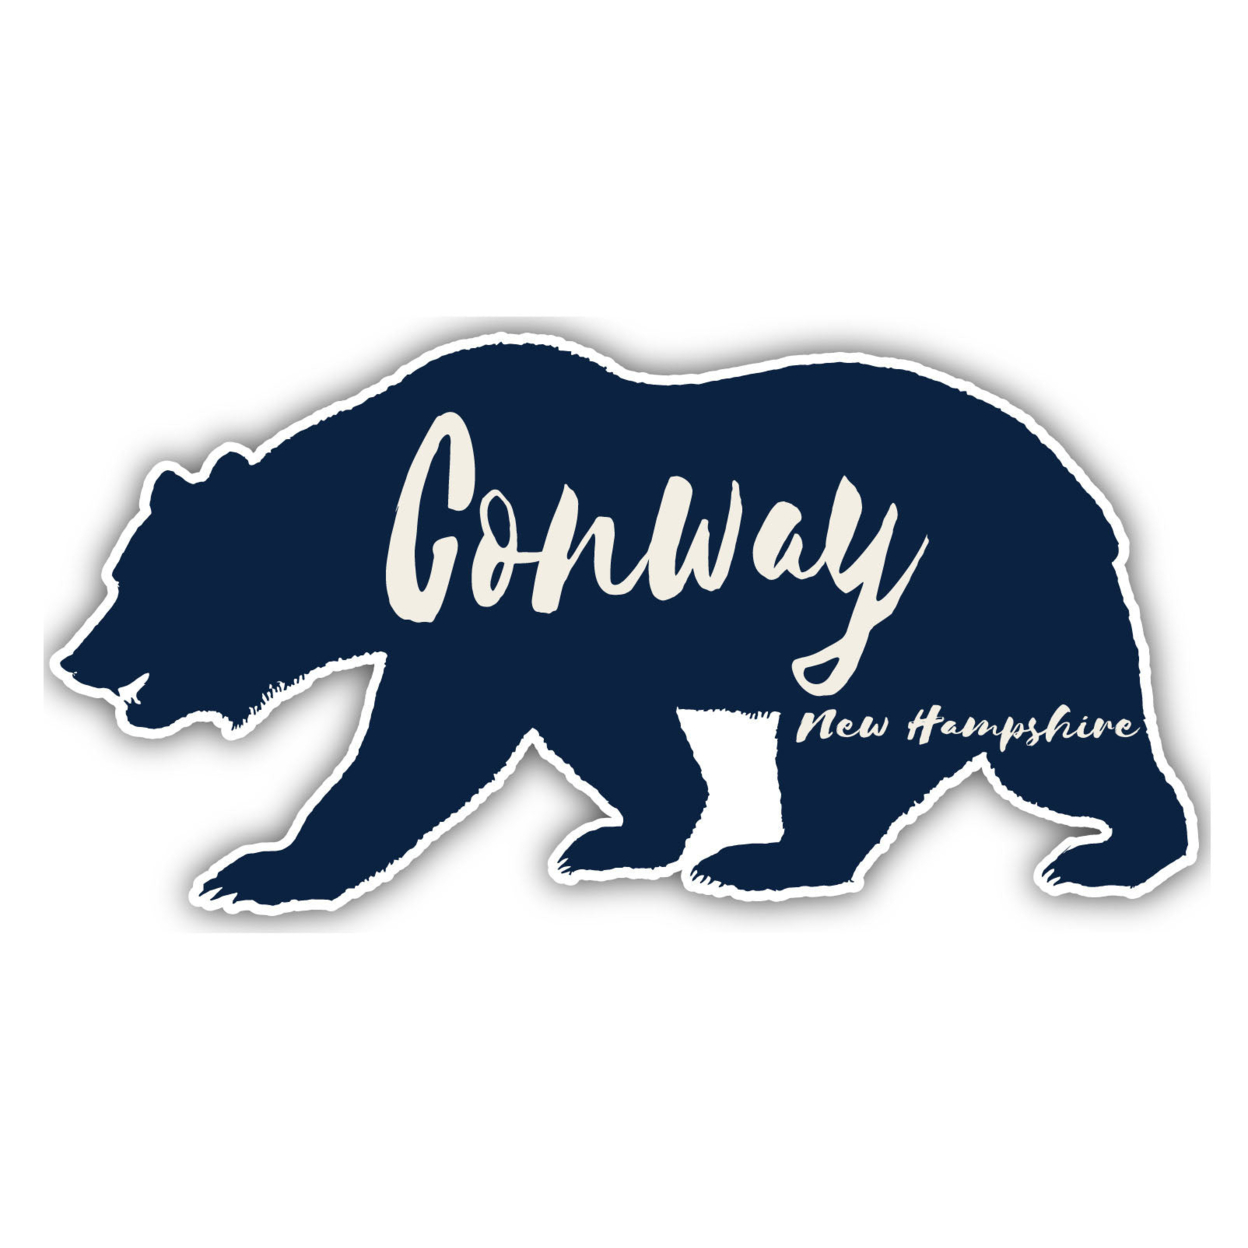 Conway New Hampshire Souvenir Decorative Stickers (Choose Theme And Size) - 4-Pack, 4-Inch, Great Outdoors